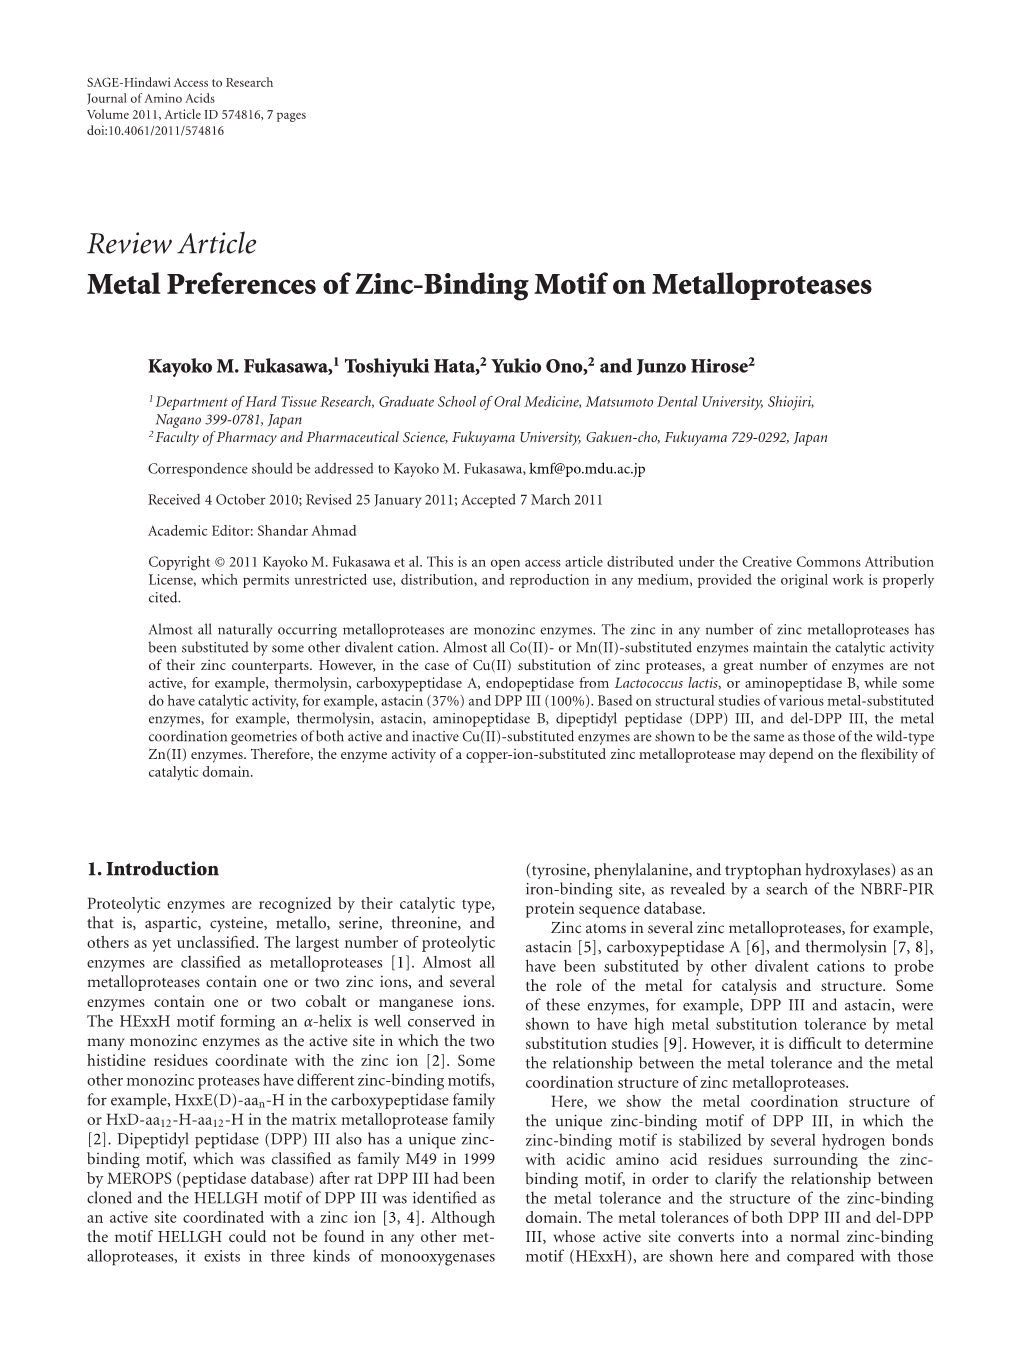 Review Article Metal Preferences of Zinc-Binding Motif on Metalloproteases